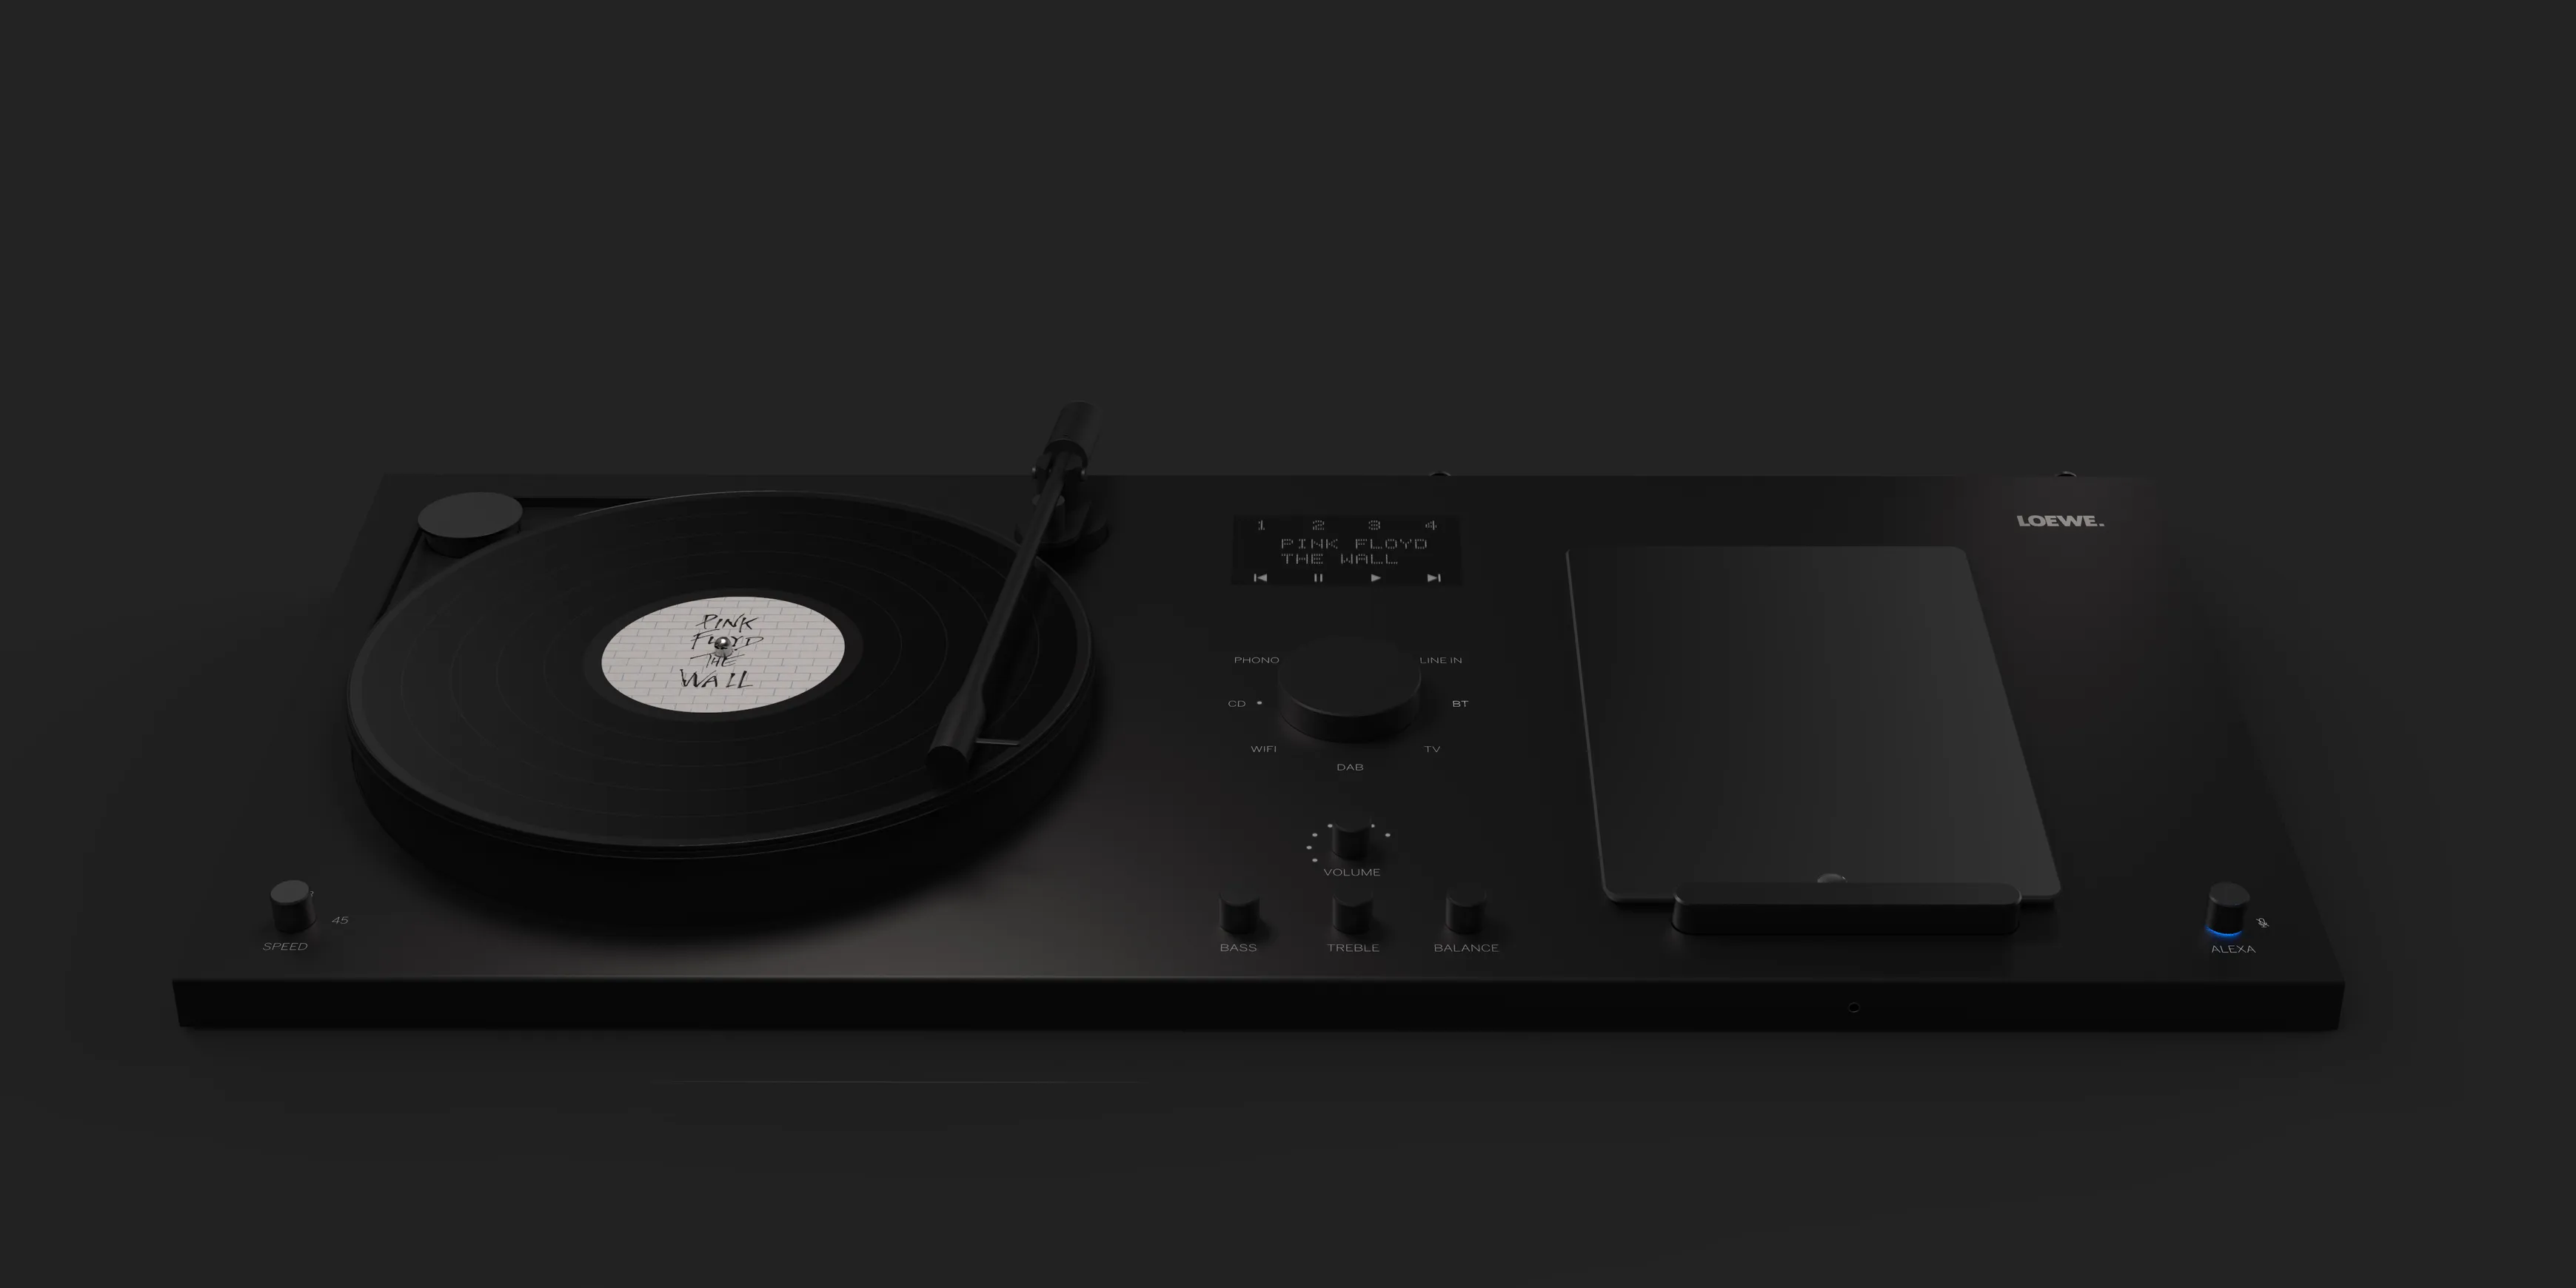 A Loewe music player with vinyl player and tablet in front of a black background